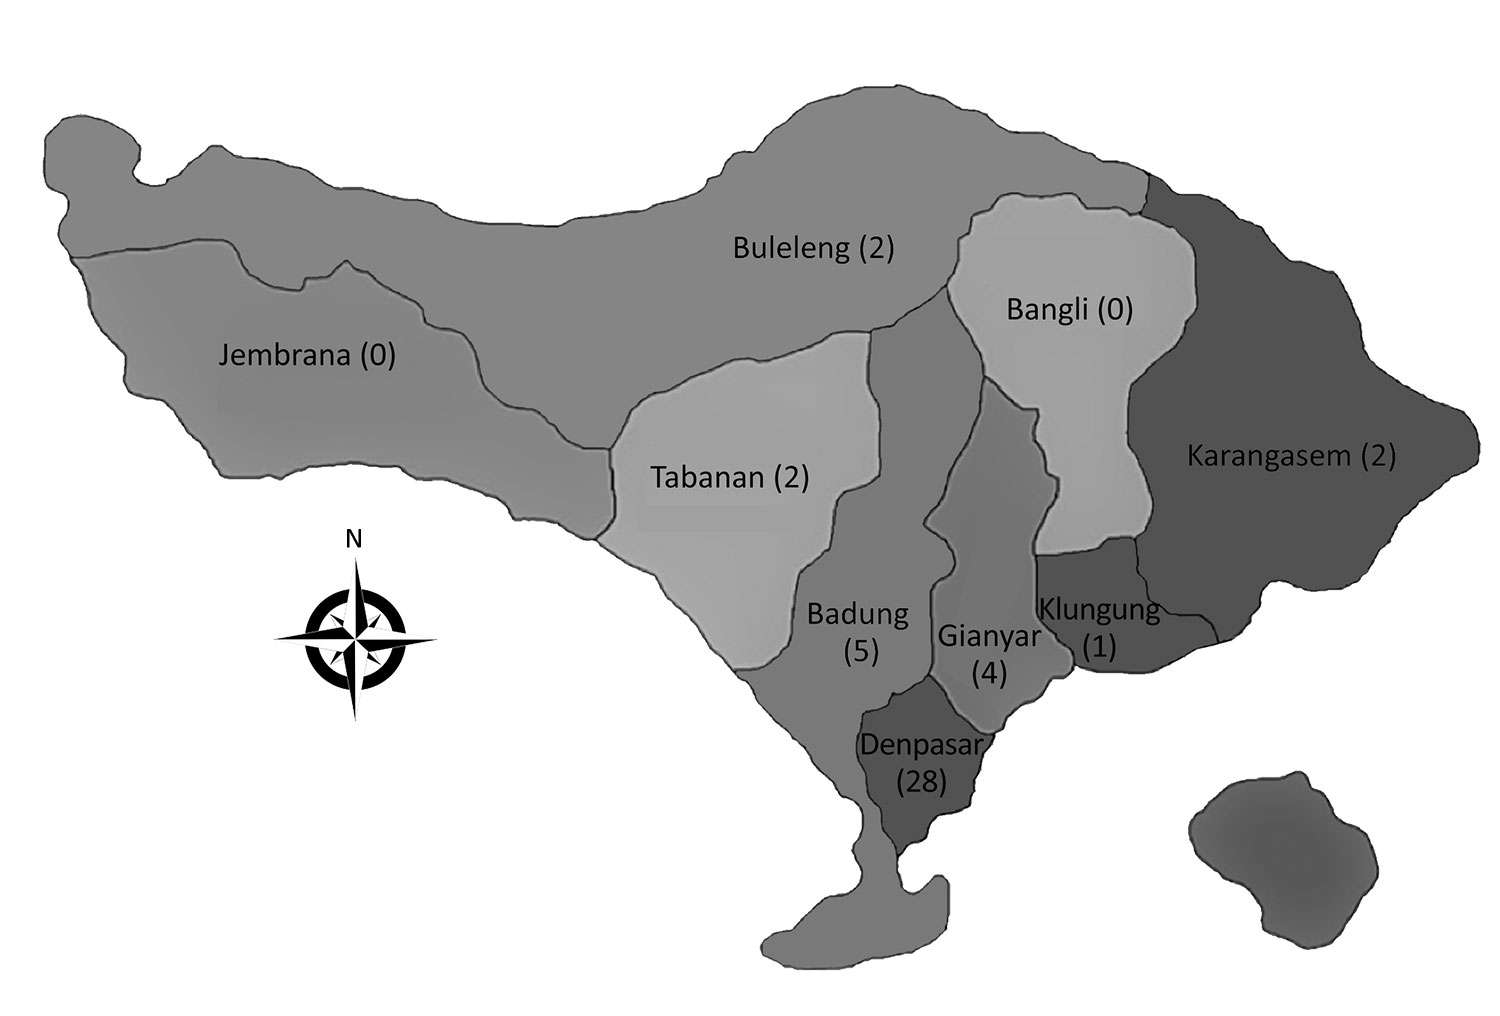 Geographic origin of patients in each regency/municipality confirmed to have Streptococcus suis meningitis in Sanglah Provincial Referral Hospital, Denpasar, Bali, Indonesia, 2014–2017. Numbers of patients are shown in parentheses.